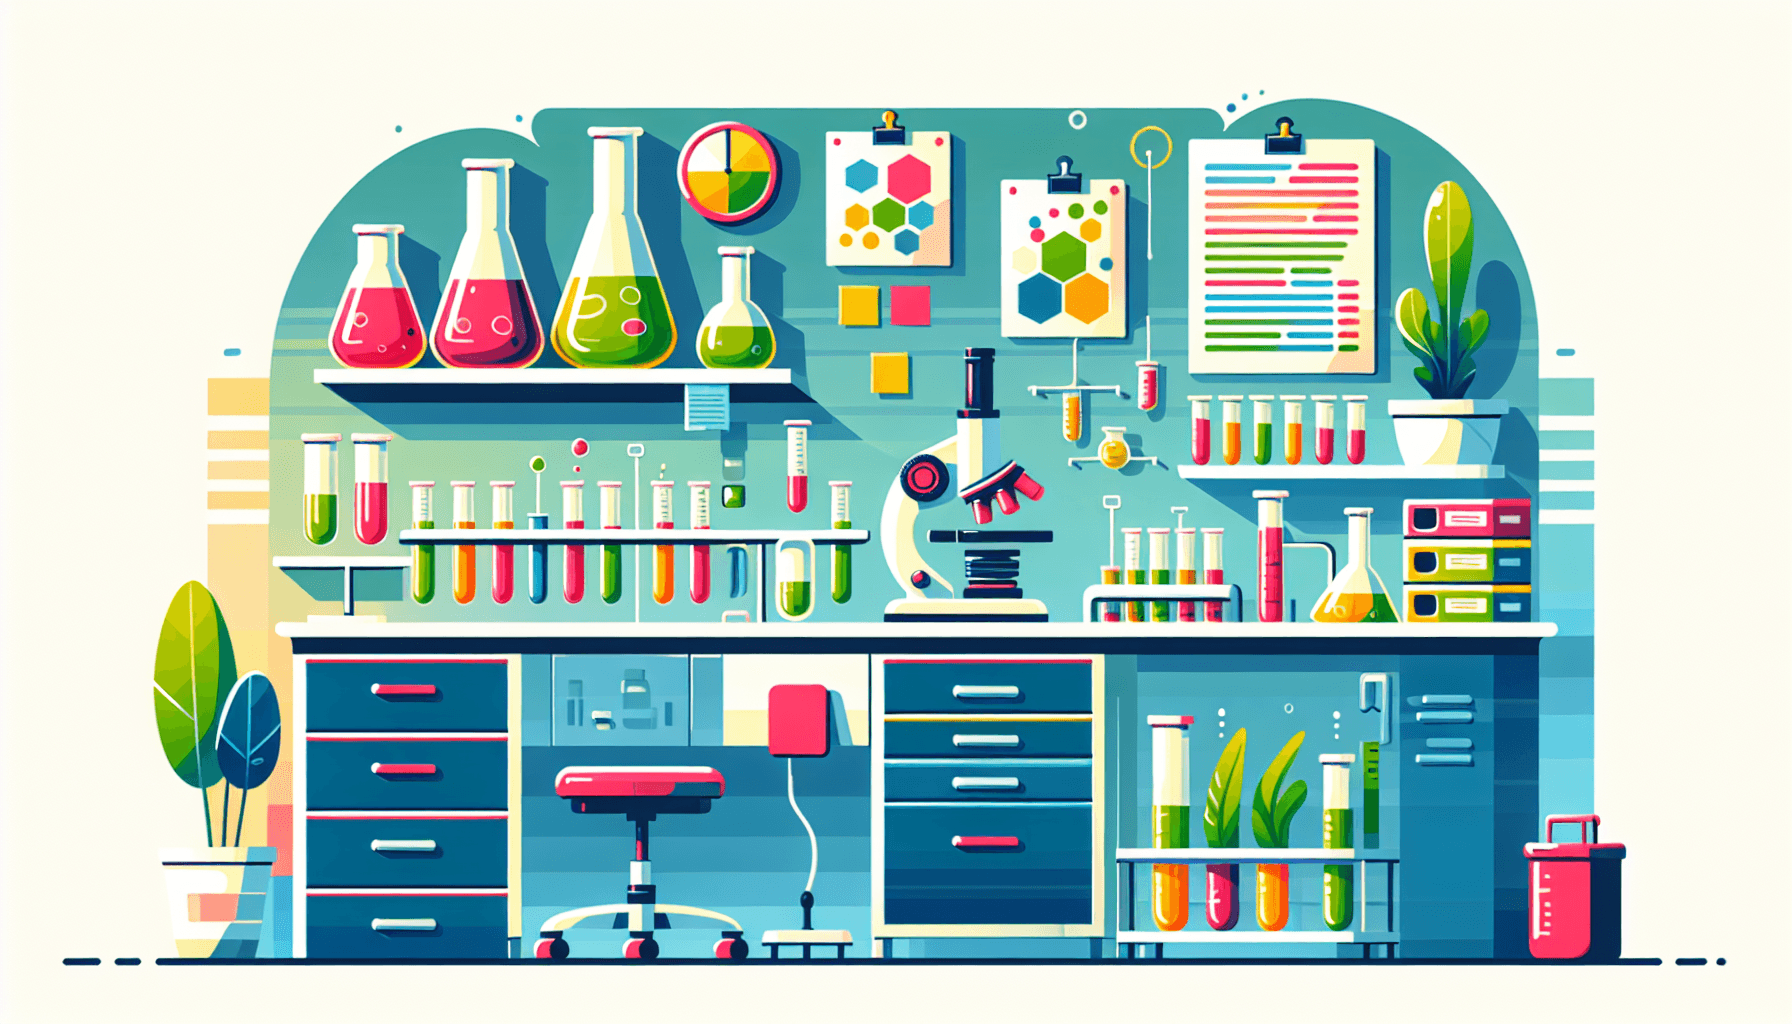 Laboratory in flat illustration style and white background, red #f47574, green #88c7a8, yellow #fcc44b, and blue #645bc8 colors.